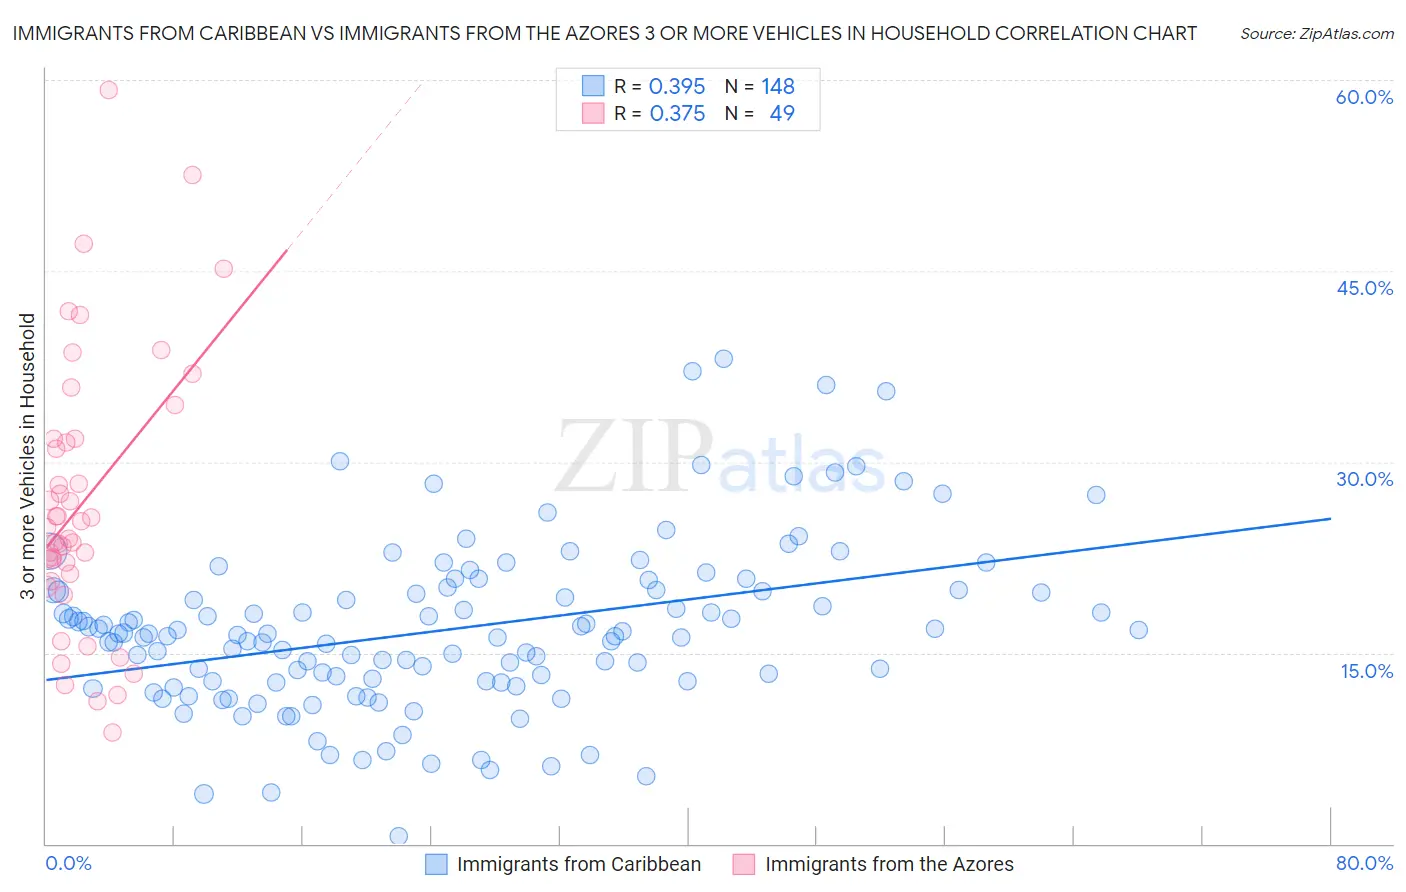 Immigrants from Caribbean vs Immigrants from the Azores 3 or more Vehicles in Household